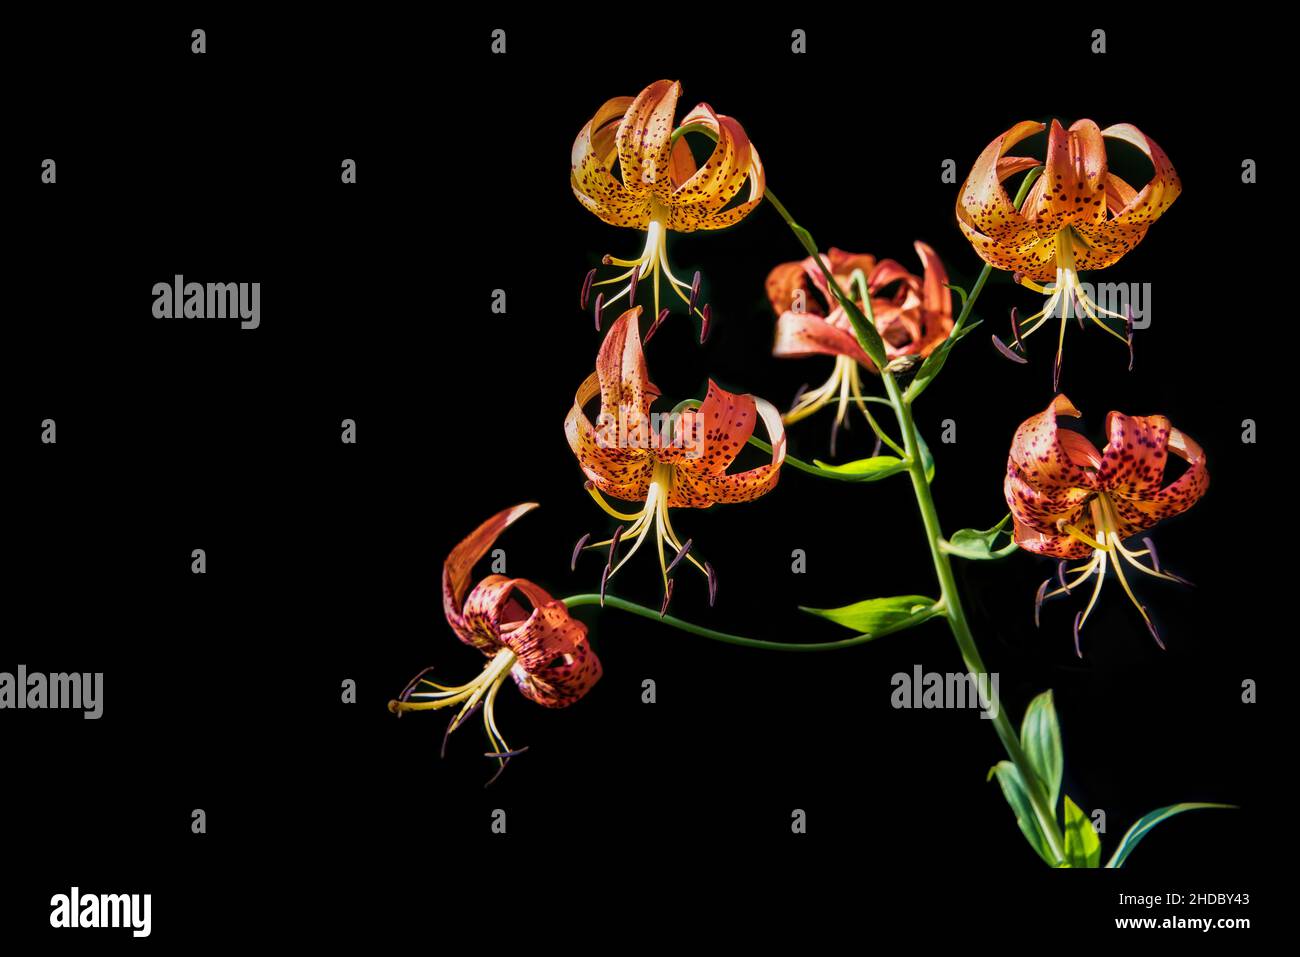 Large Tiger Lily with multiple flowering shoots on a black background. Stock Photo